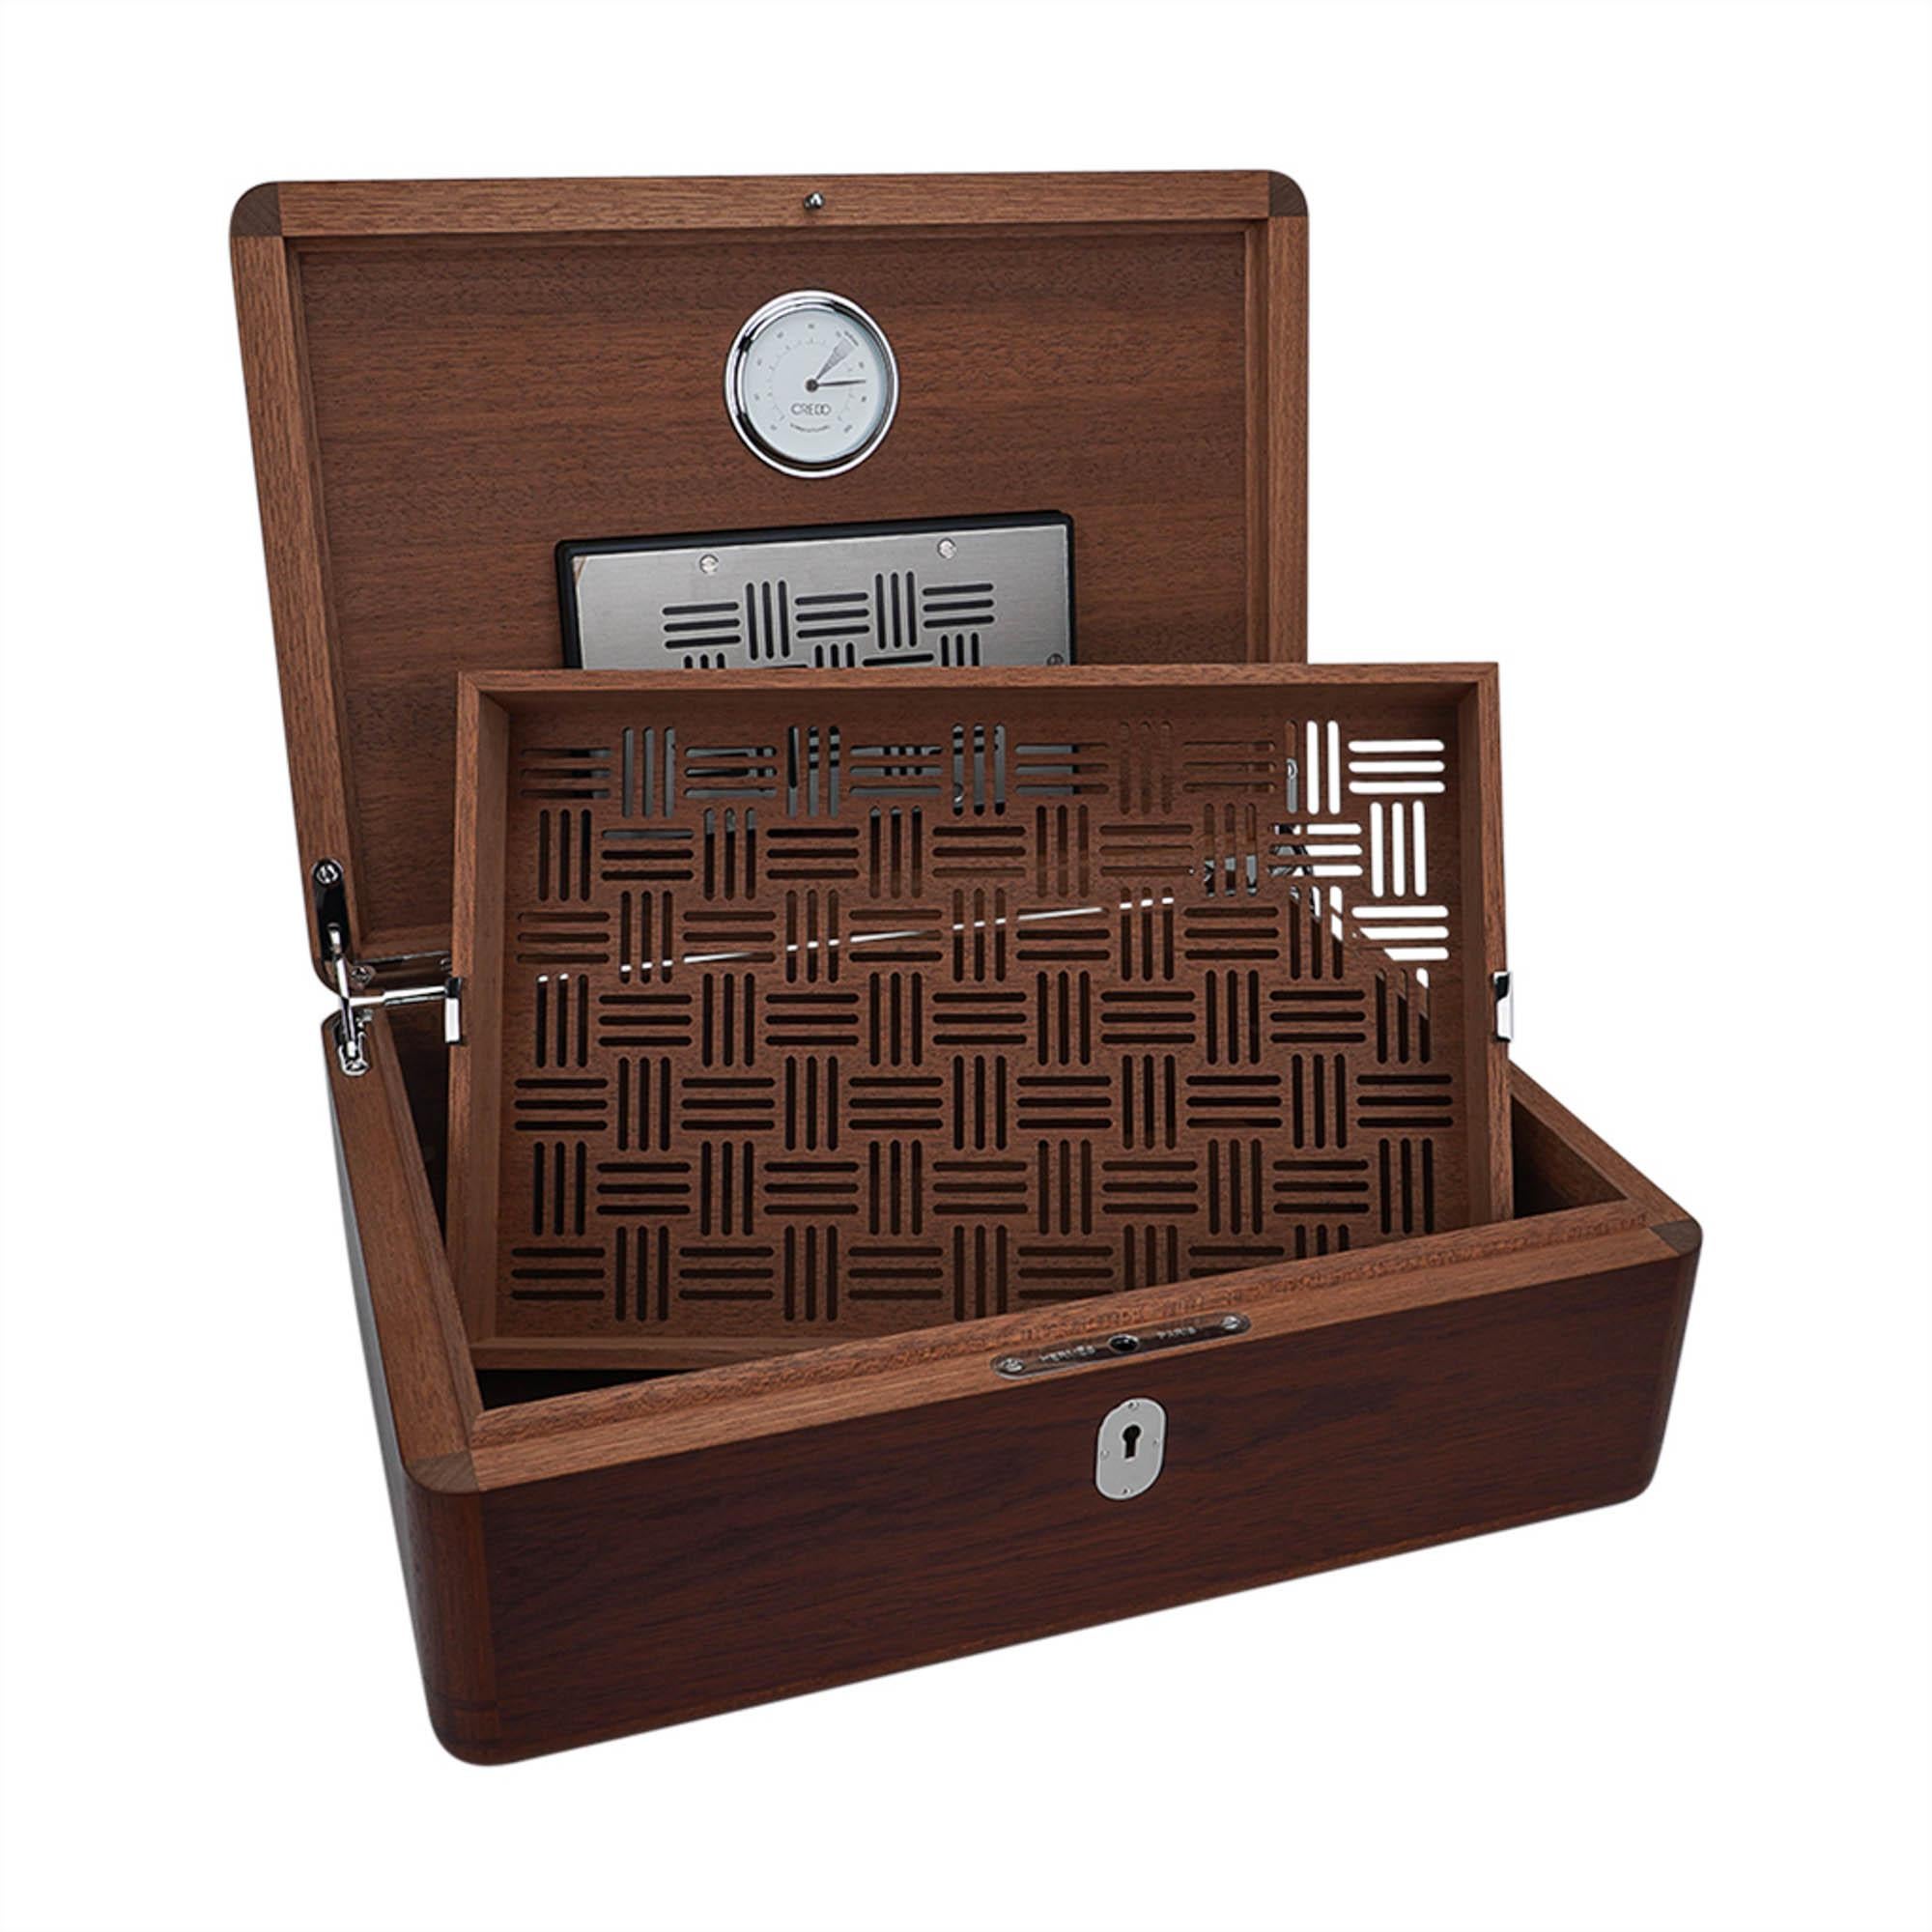 Hermes Coffret a Cigares Humidor Limited Edition Sycamore Holz Sesam Eidechse im Angebot 3